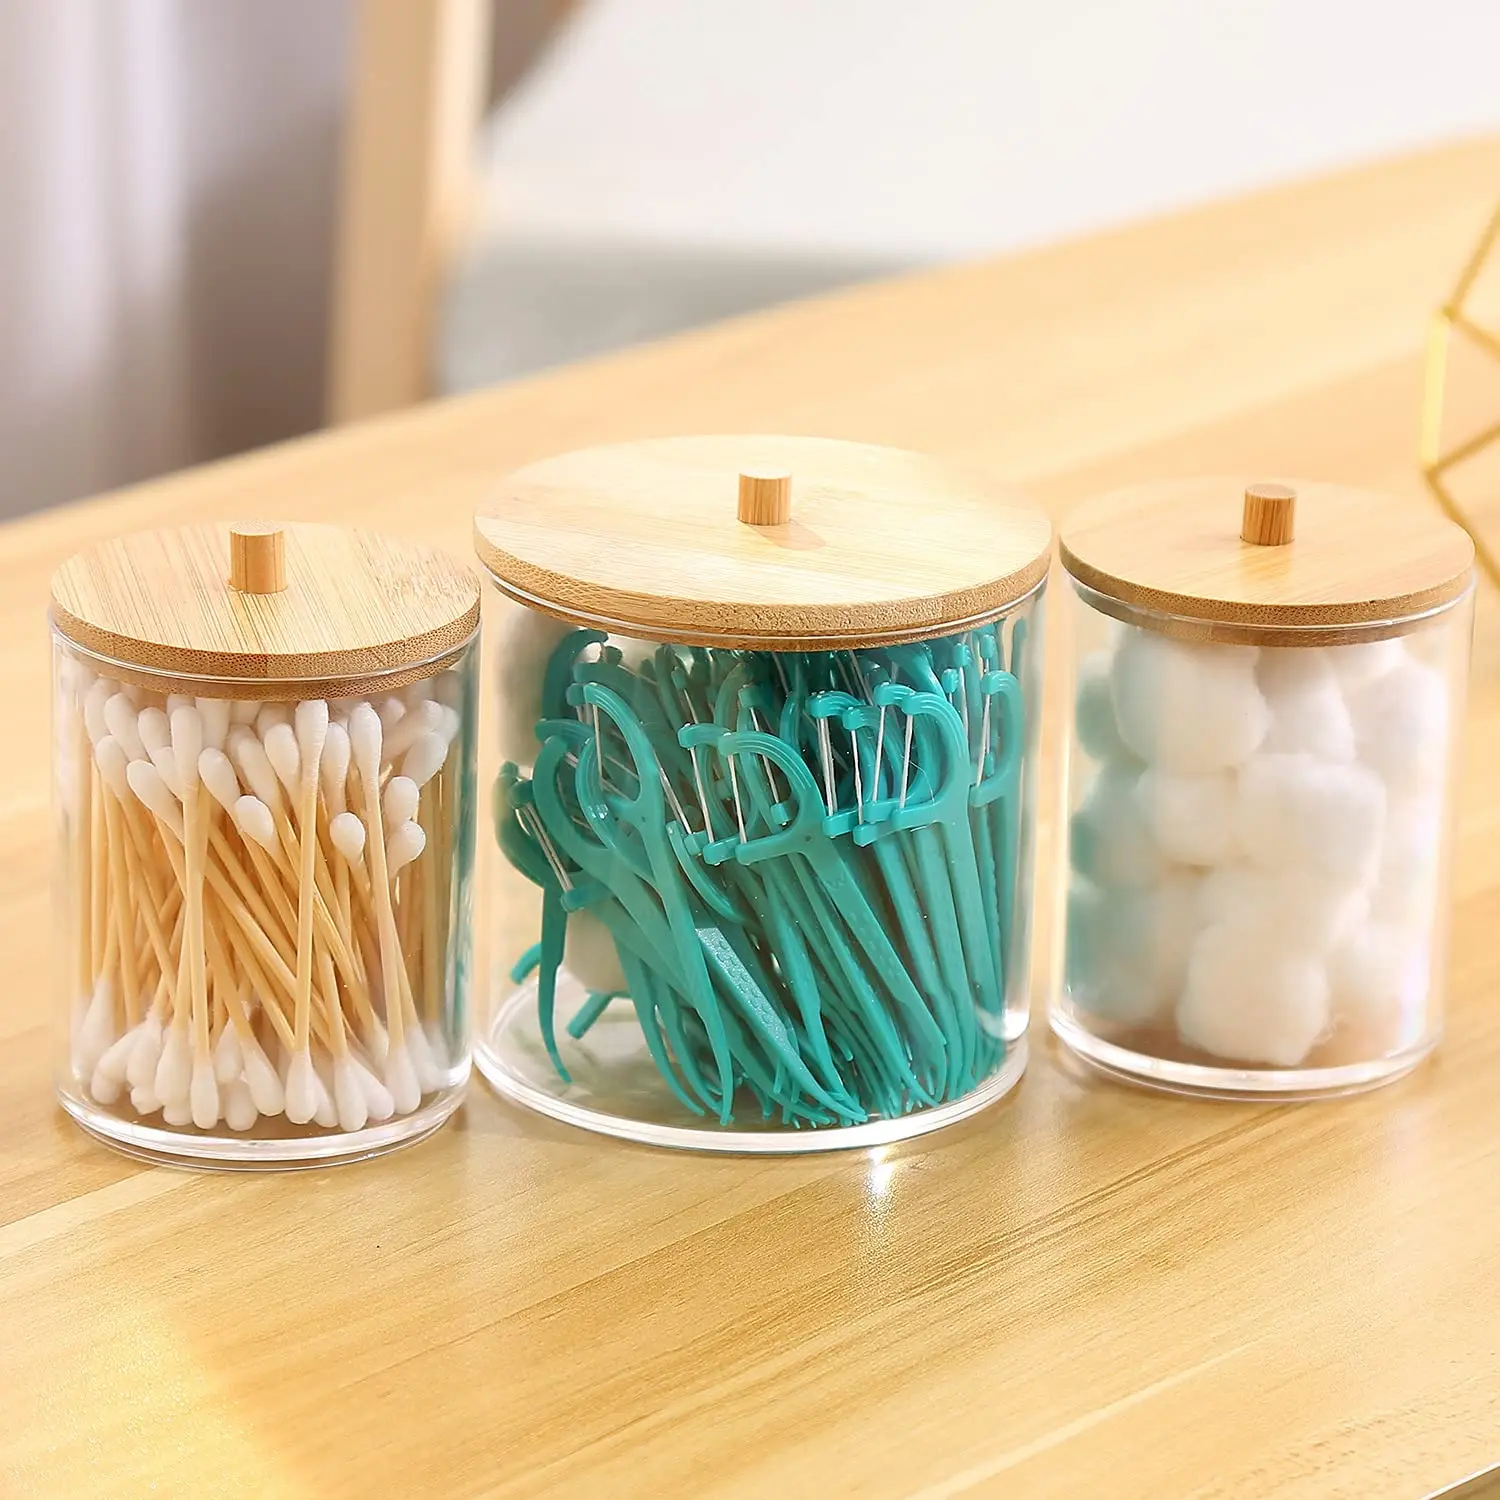 PS Acrylic Organizer Cotton Swab Ball Pad Bud Holder, Qtip Jar Clear Apothecary Jars Bathroom Sponges Hair Band with Bamboo Lids